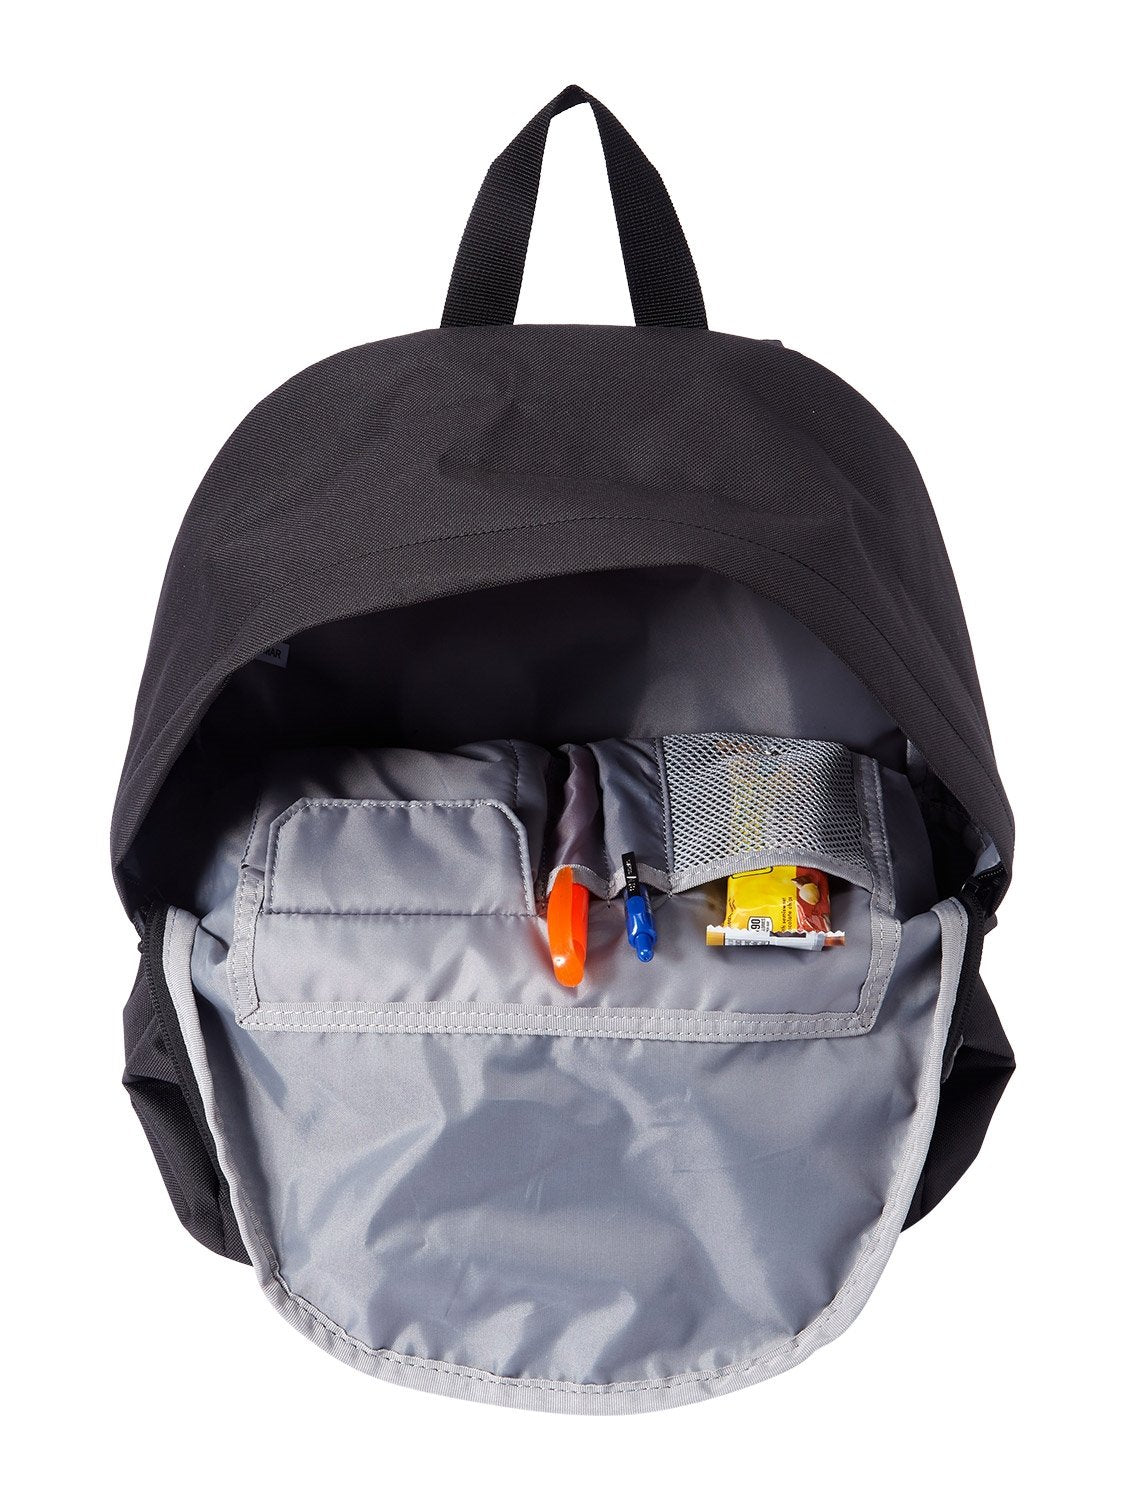 Quiksilver Mens the Poster Backpack